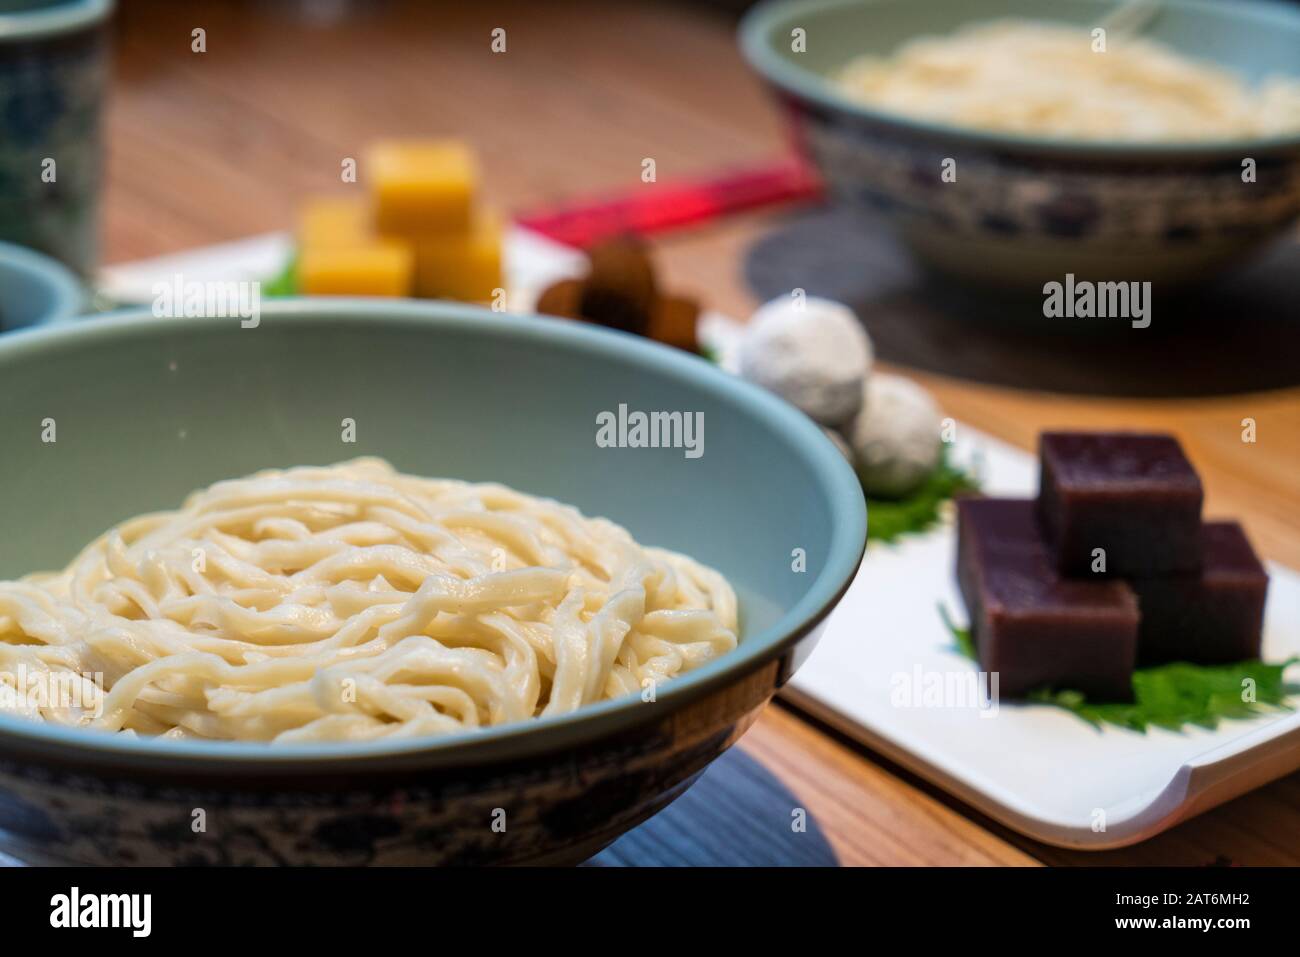 Chinese noodles with Beijing traditional pastry, such as yellow Pea jelly, Rolling donkey (glutinous rice rolls with sweet bean flour) on the table Stock Photo